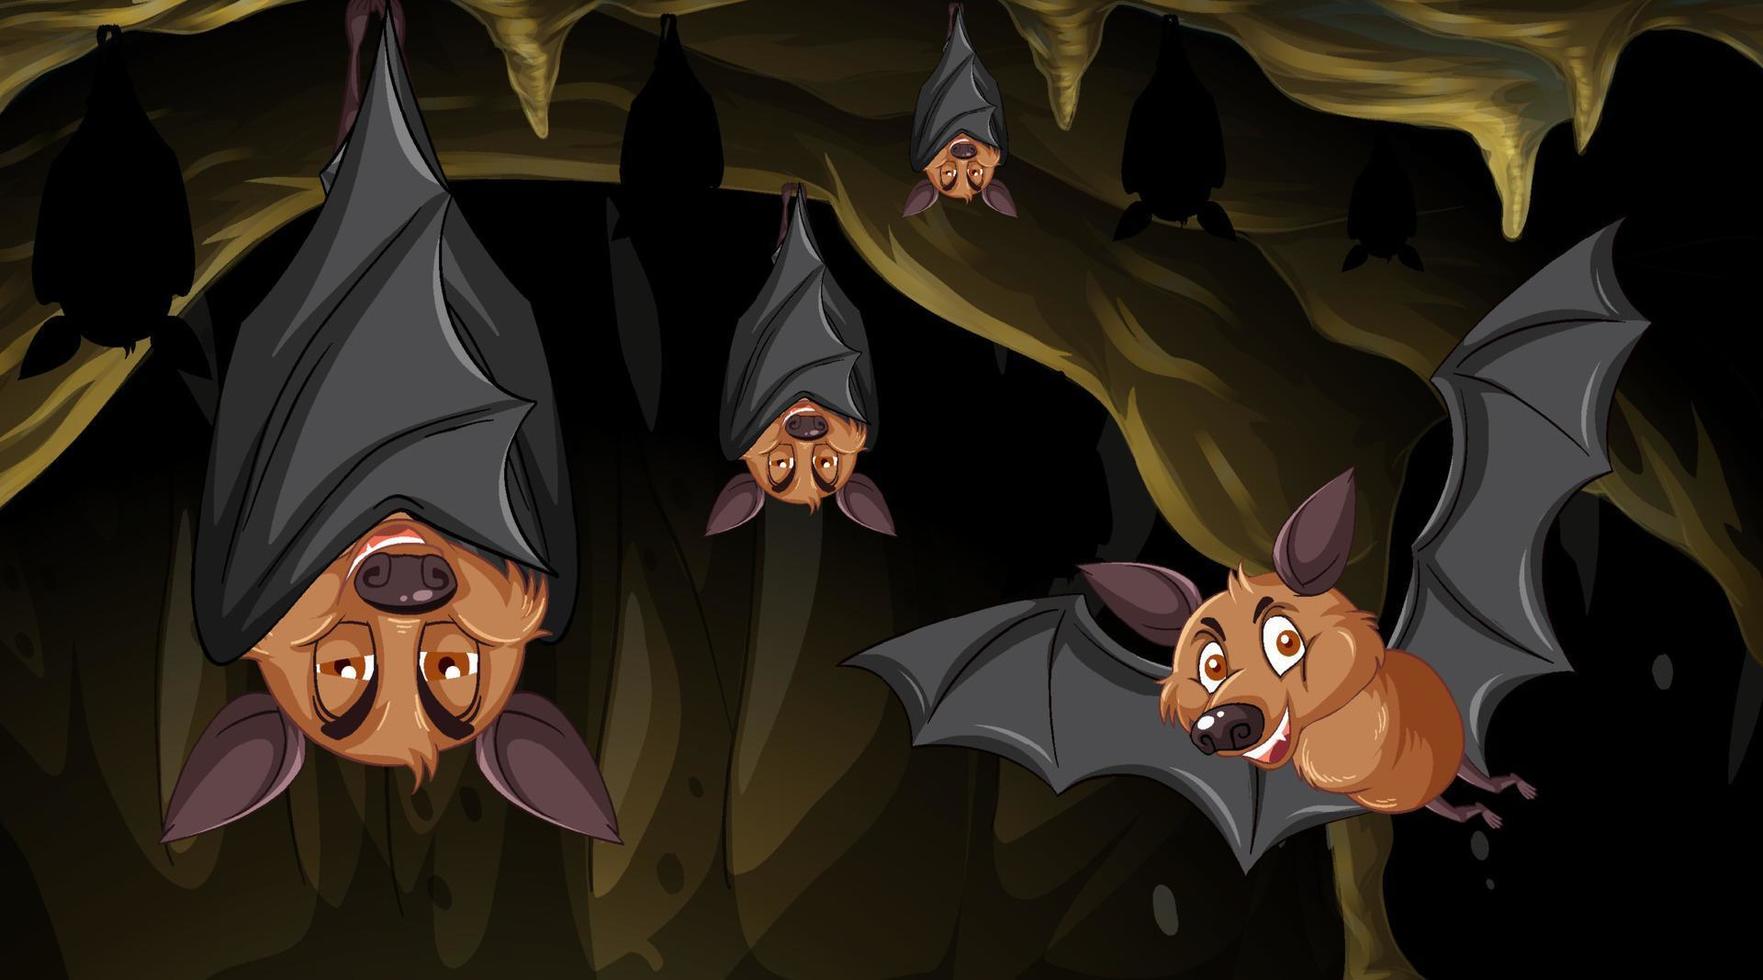 Cave scene with group of bats in cartoon style vector